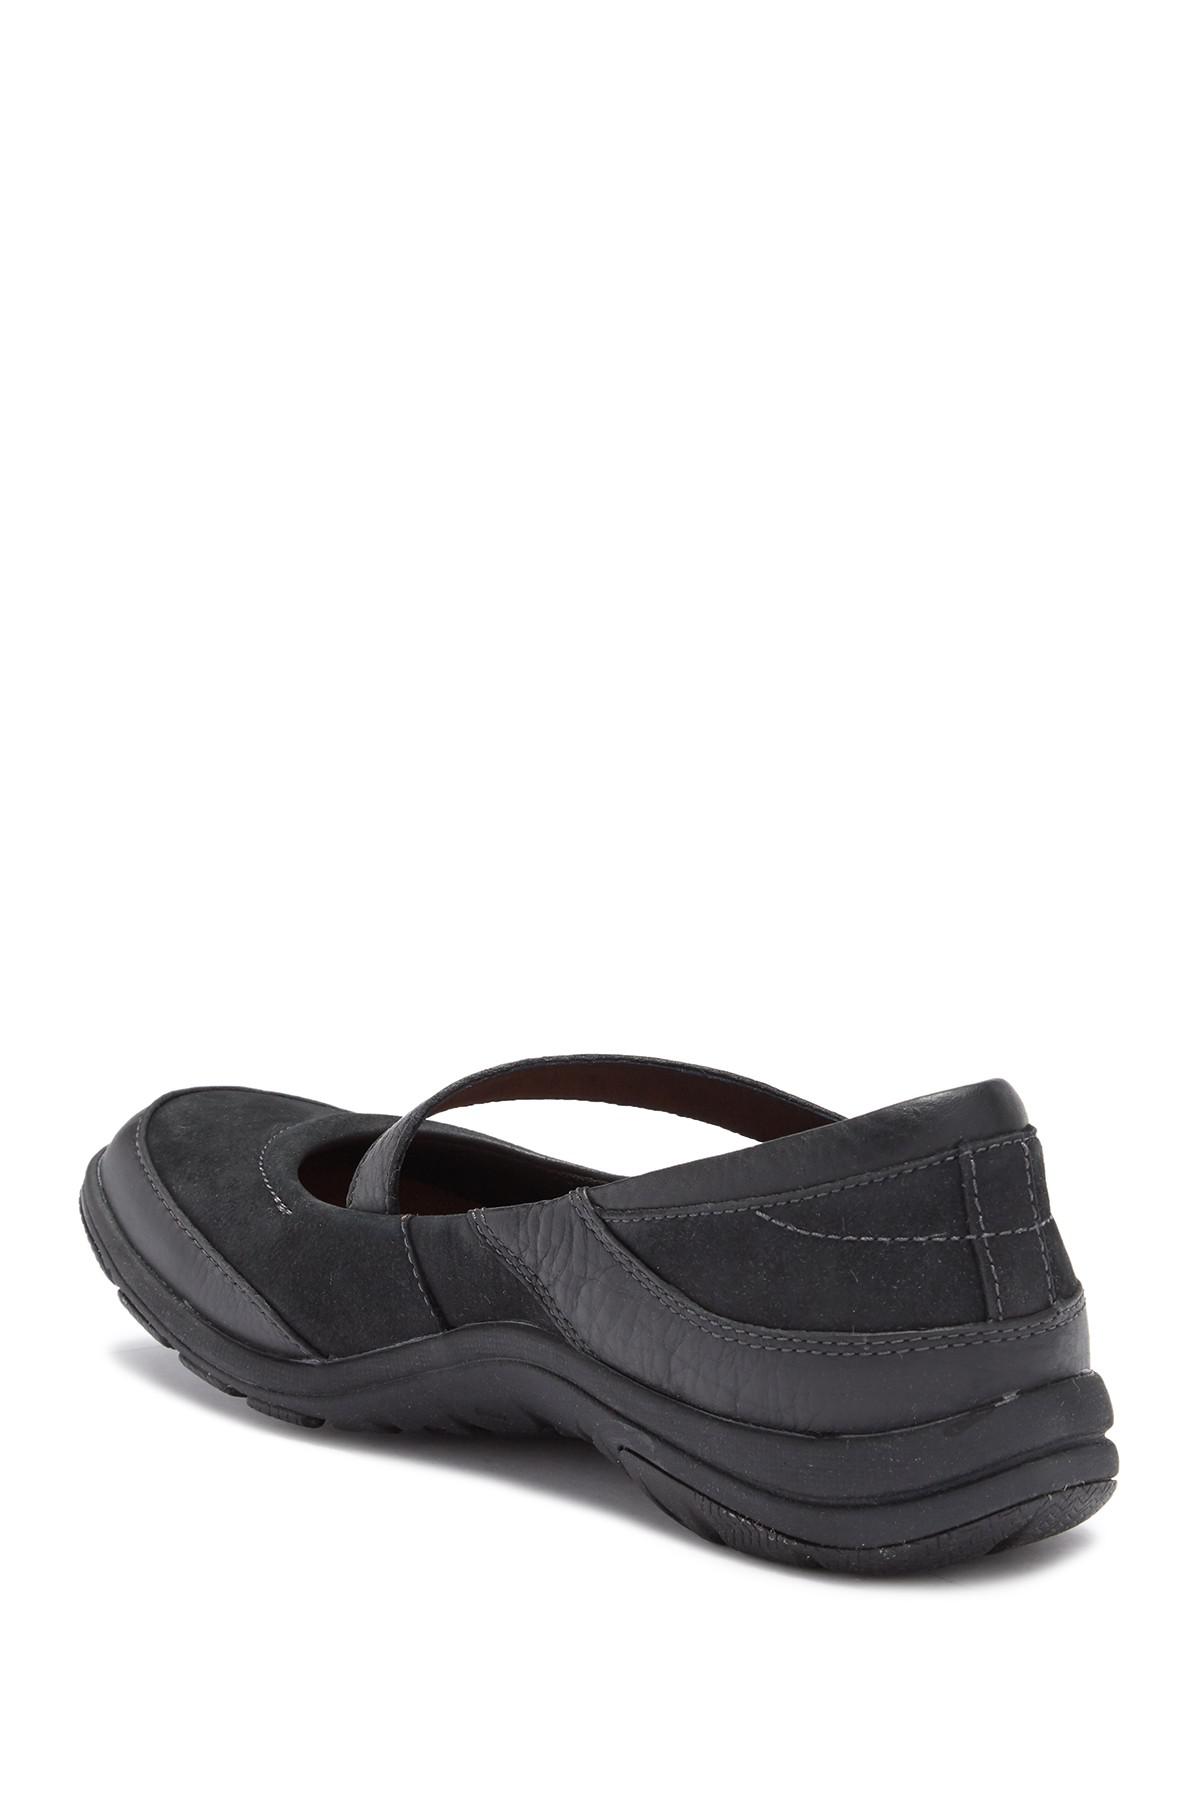 Merrell Dassie Mary Jane Shoes in Black Lyst